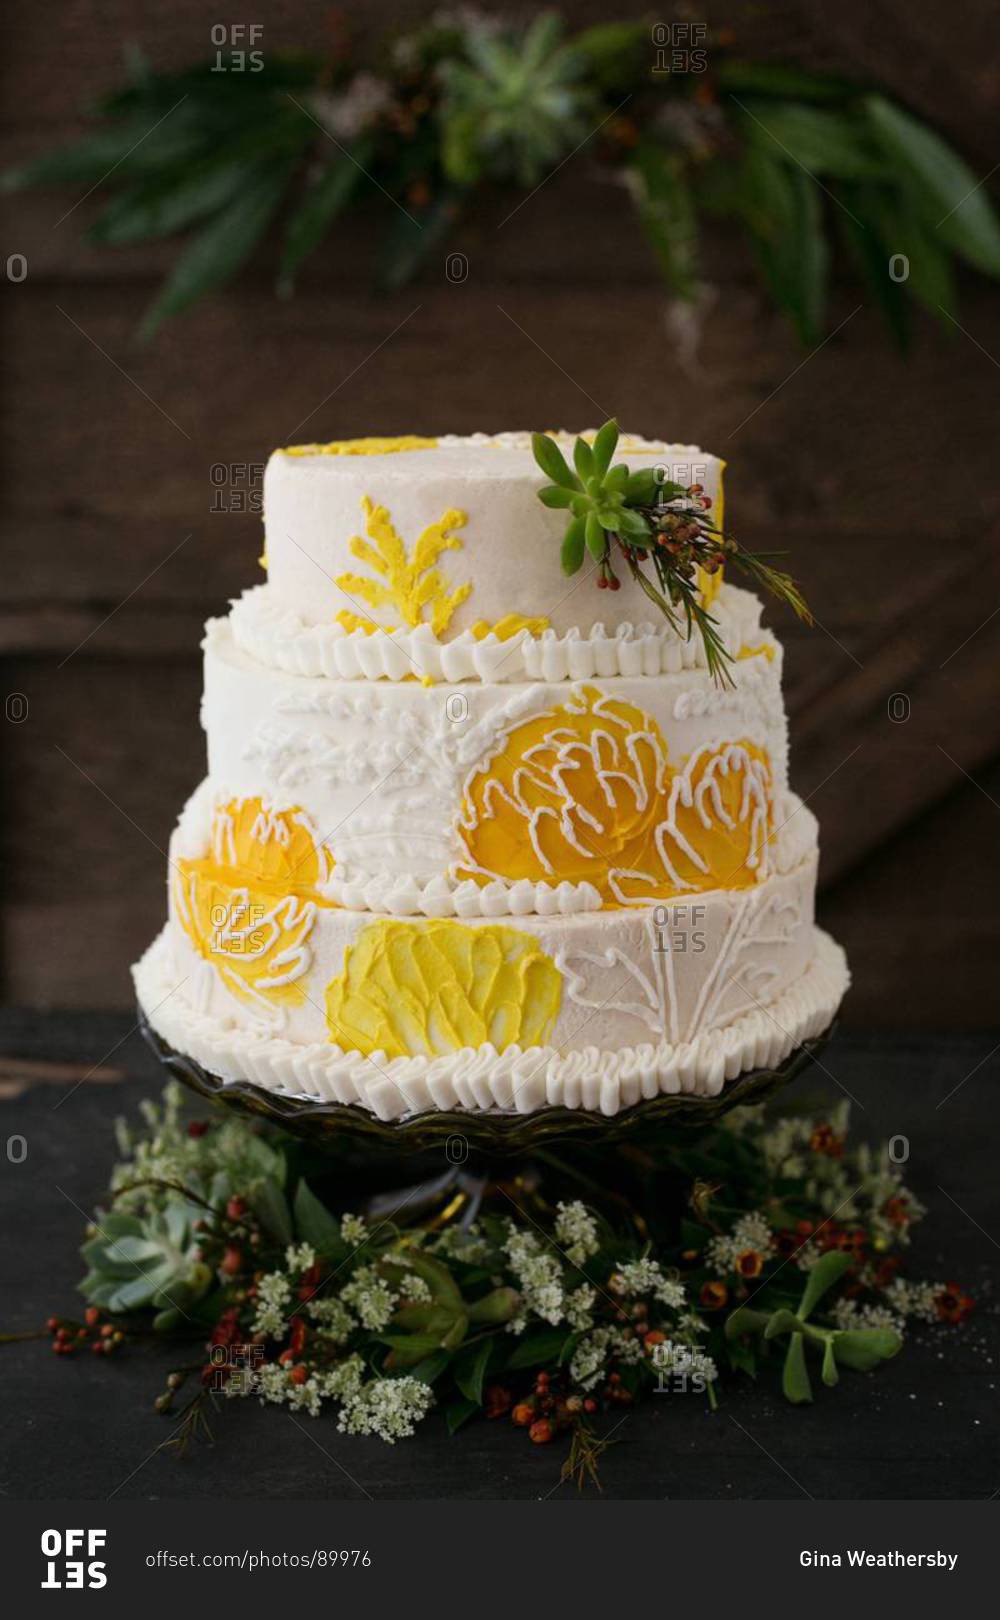 Layered cake decorated with yellow flower pattern